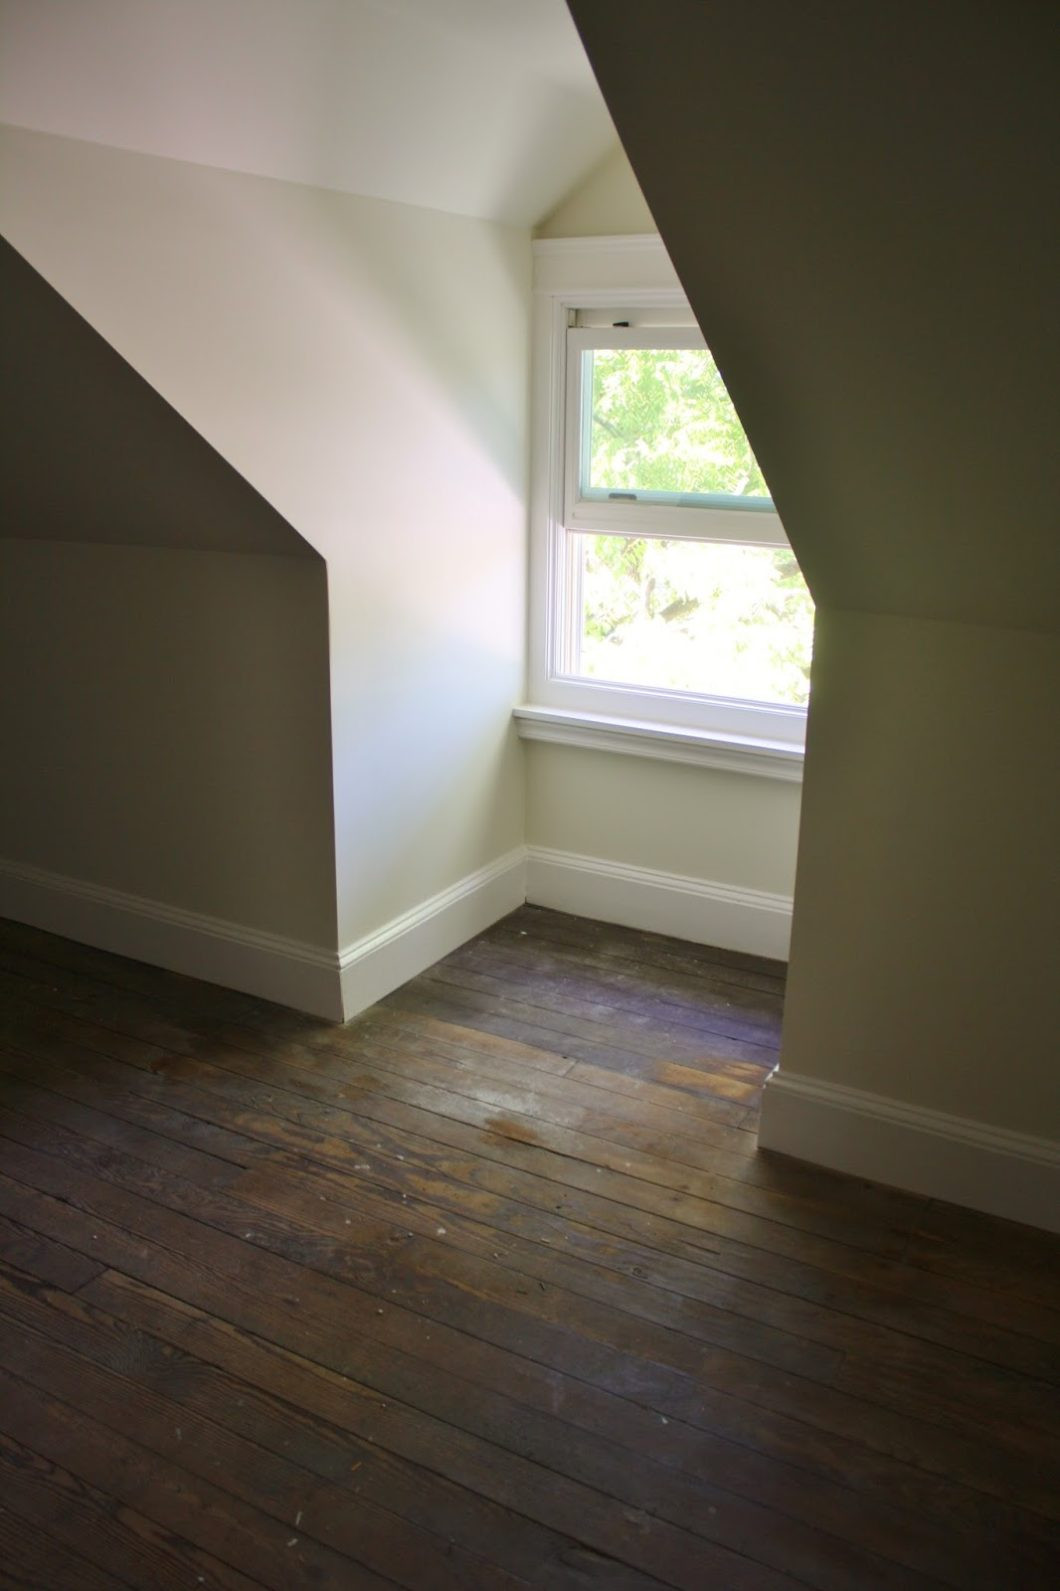 22 Popular Hardwood Floor Refinishing Cost Seattle 2024 free download hardwood floor refinishing cost seattle of image number 6568 from post restoring old hardwood floors will within high street market floor refinished hardwood diy restoring old floors will wo